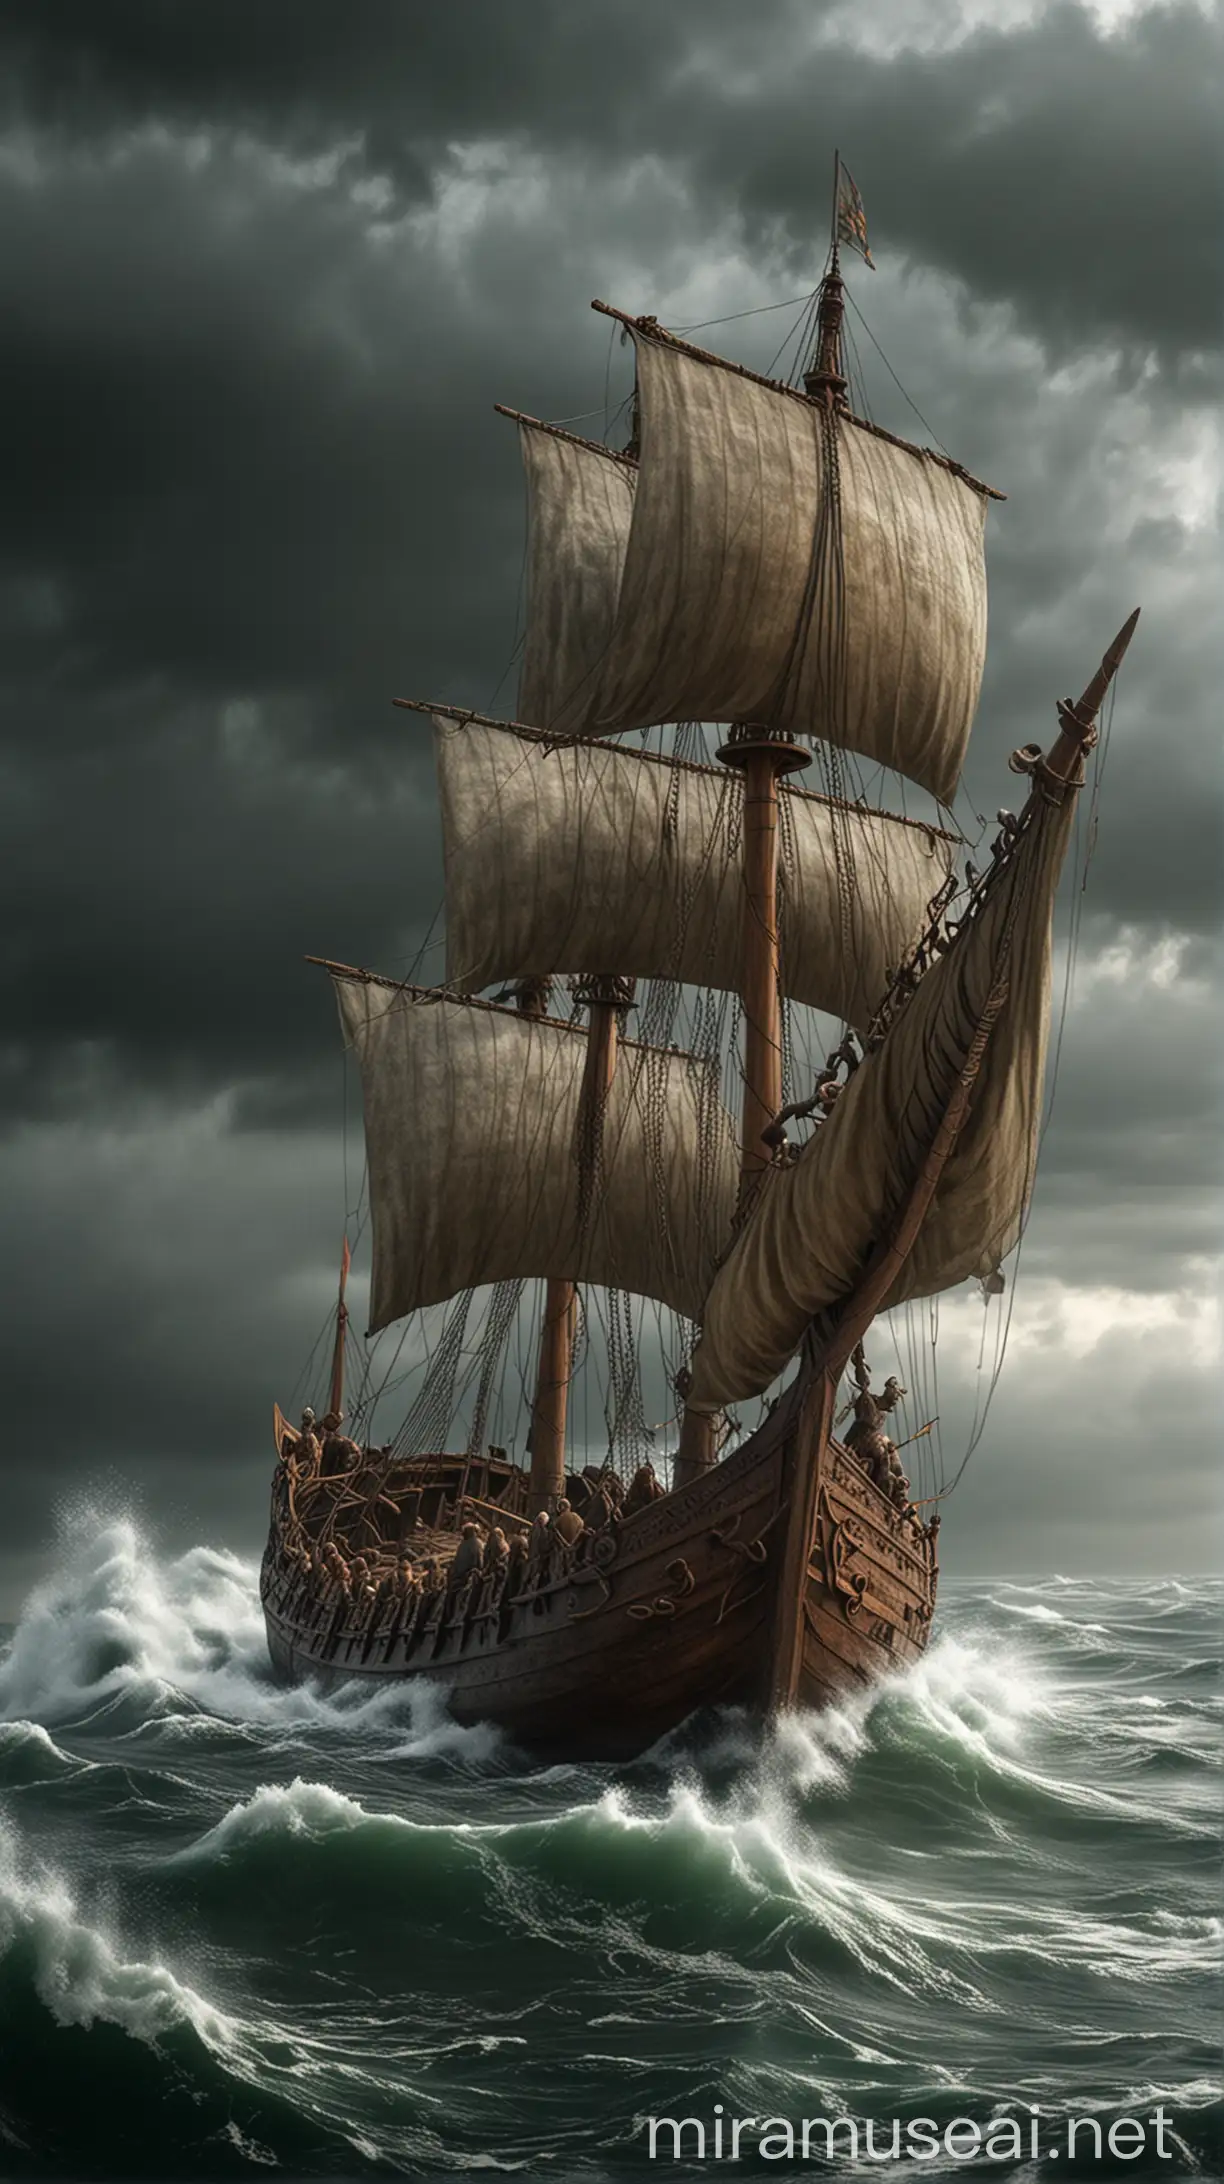 Viking longships sailing across stormy seas, their sails billowing in the wind as they approach the shores of England. hyper realistic